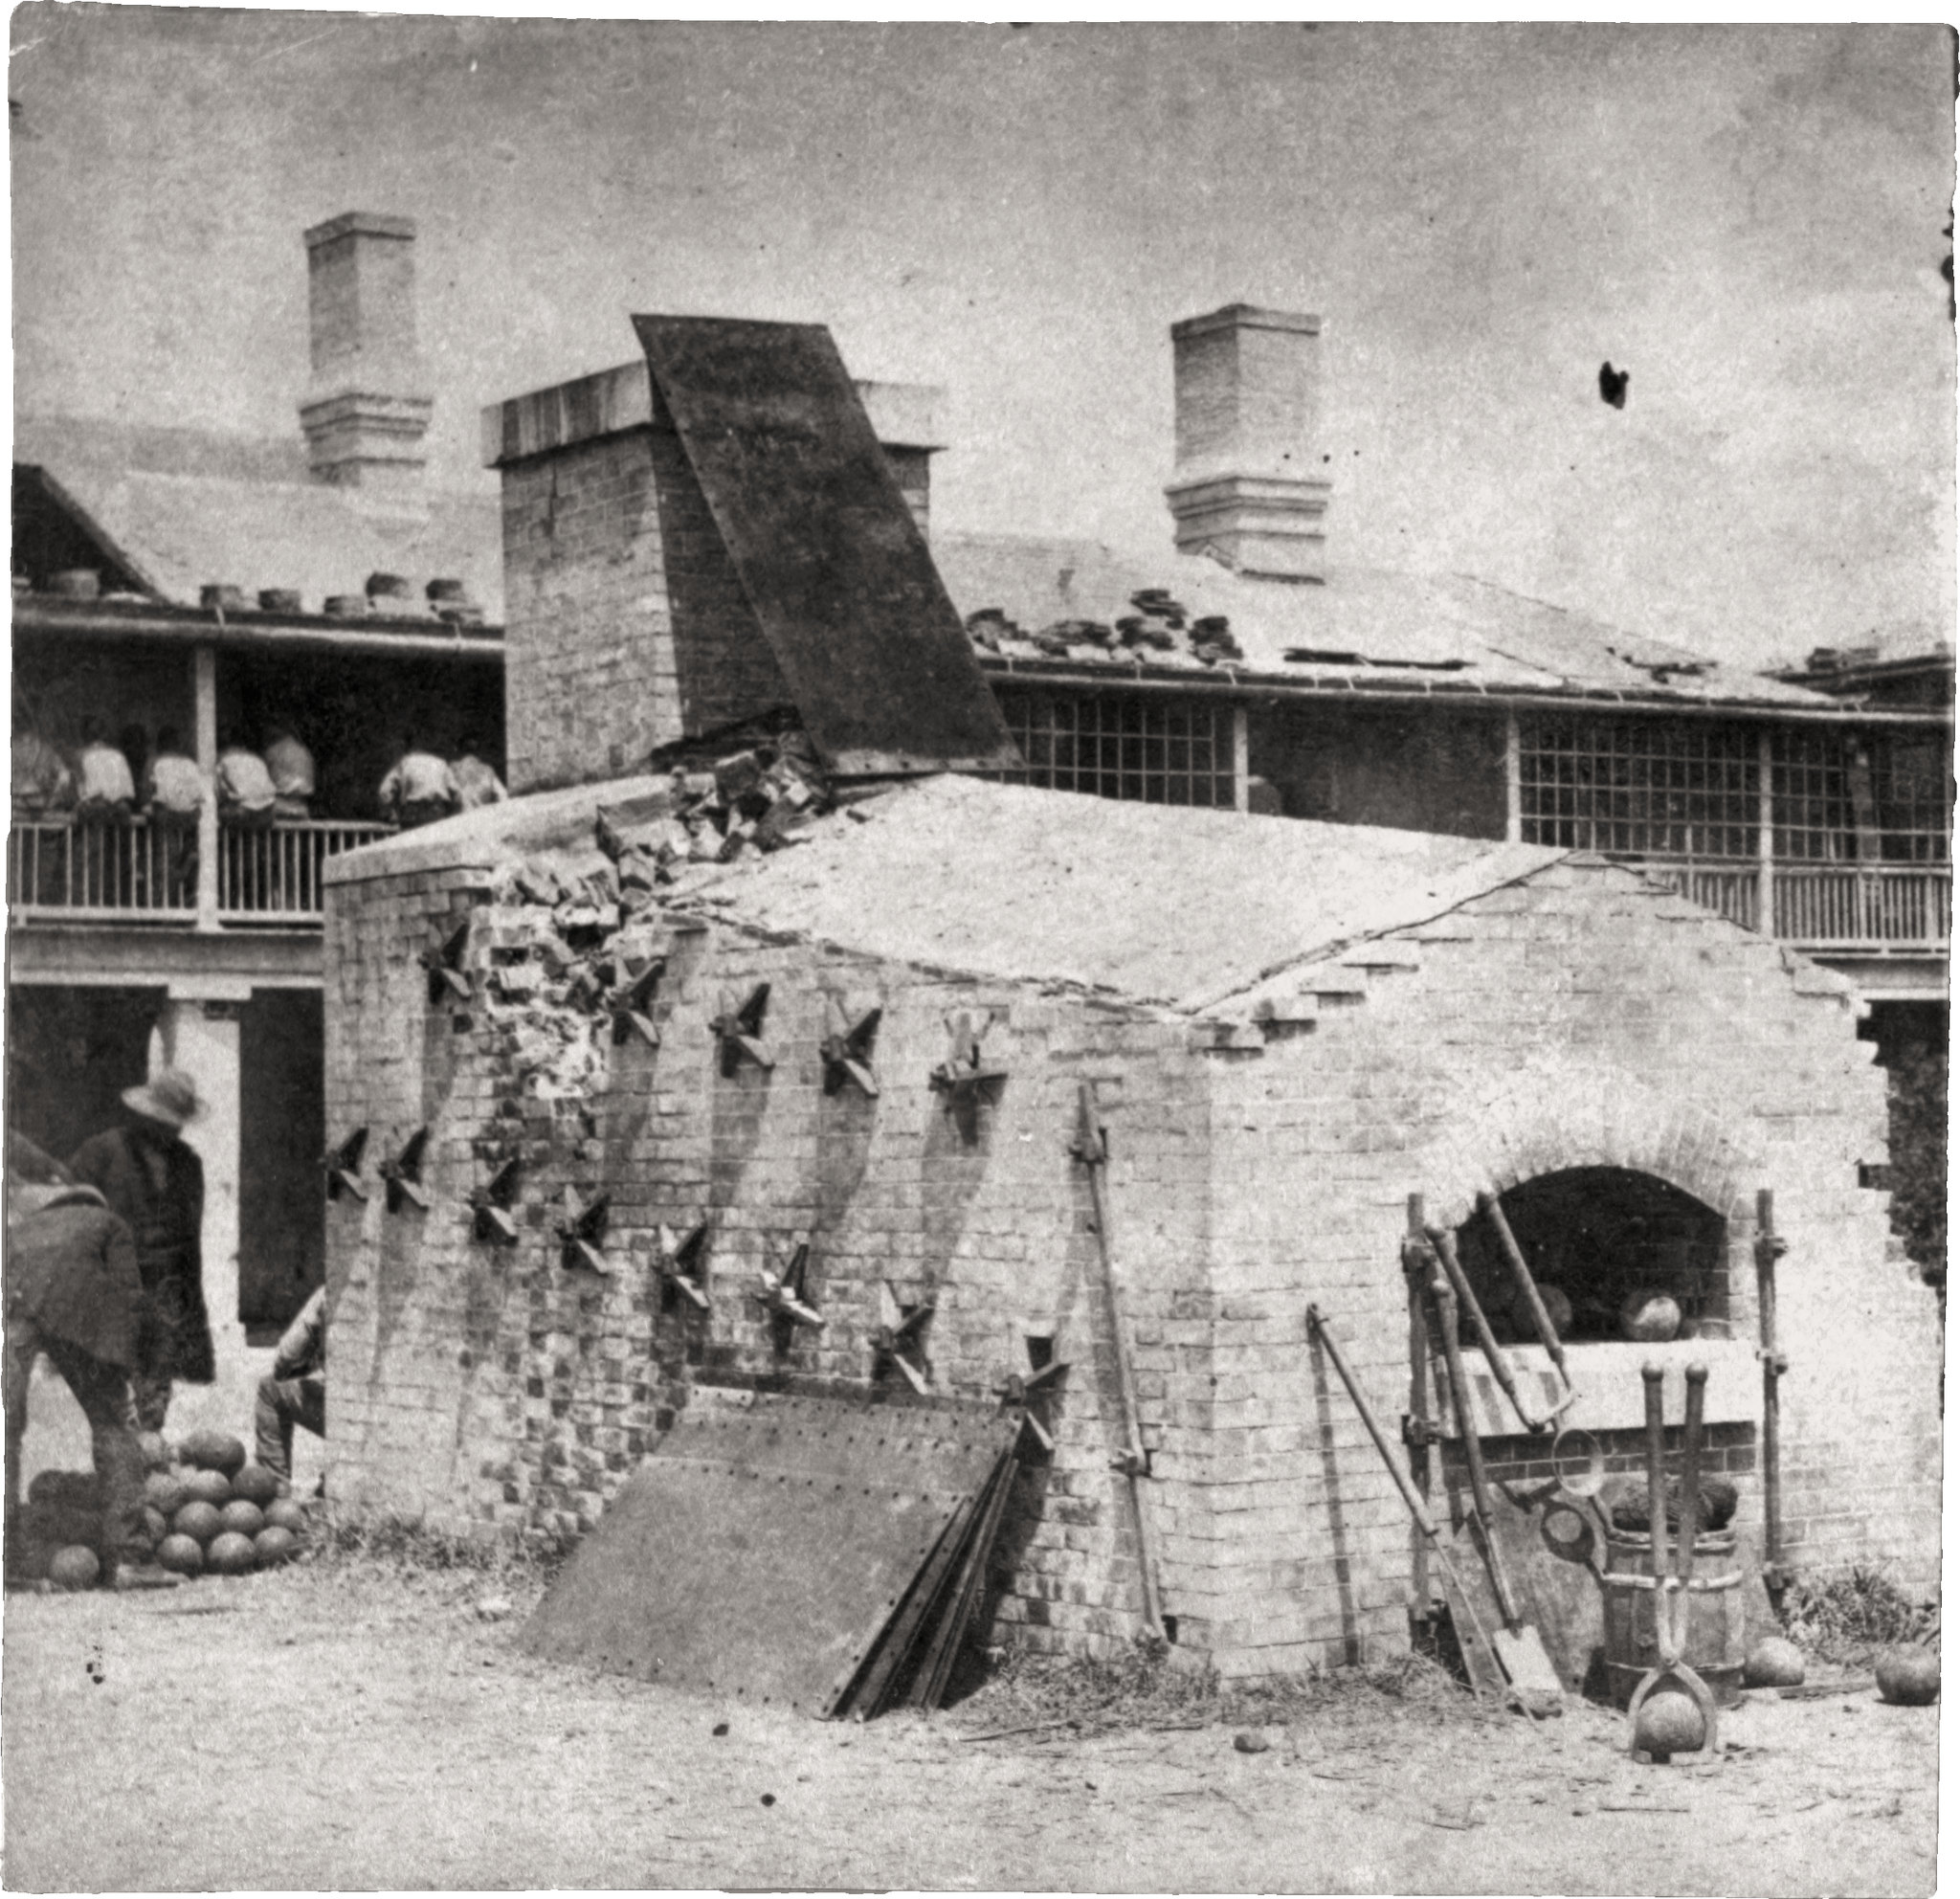 Fort Moultrie shot furnace, damaged in the bombardment, with officer's quarters behind it.